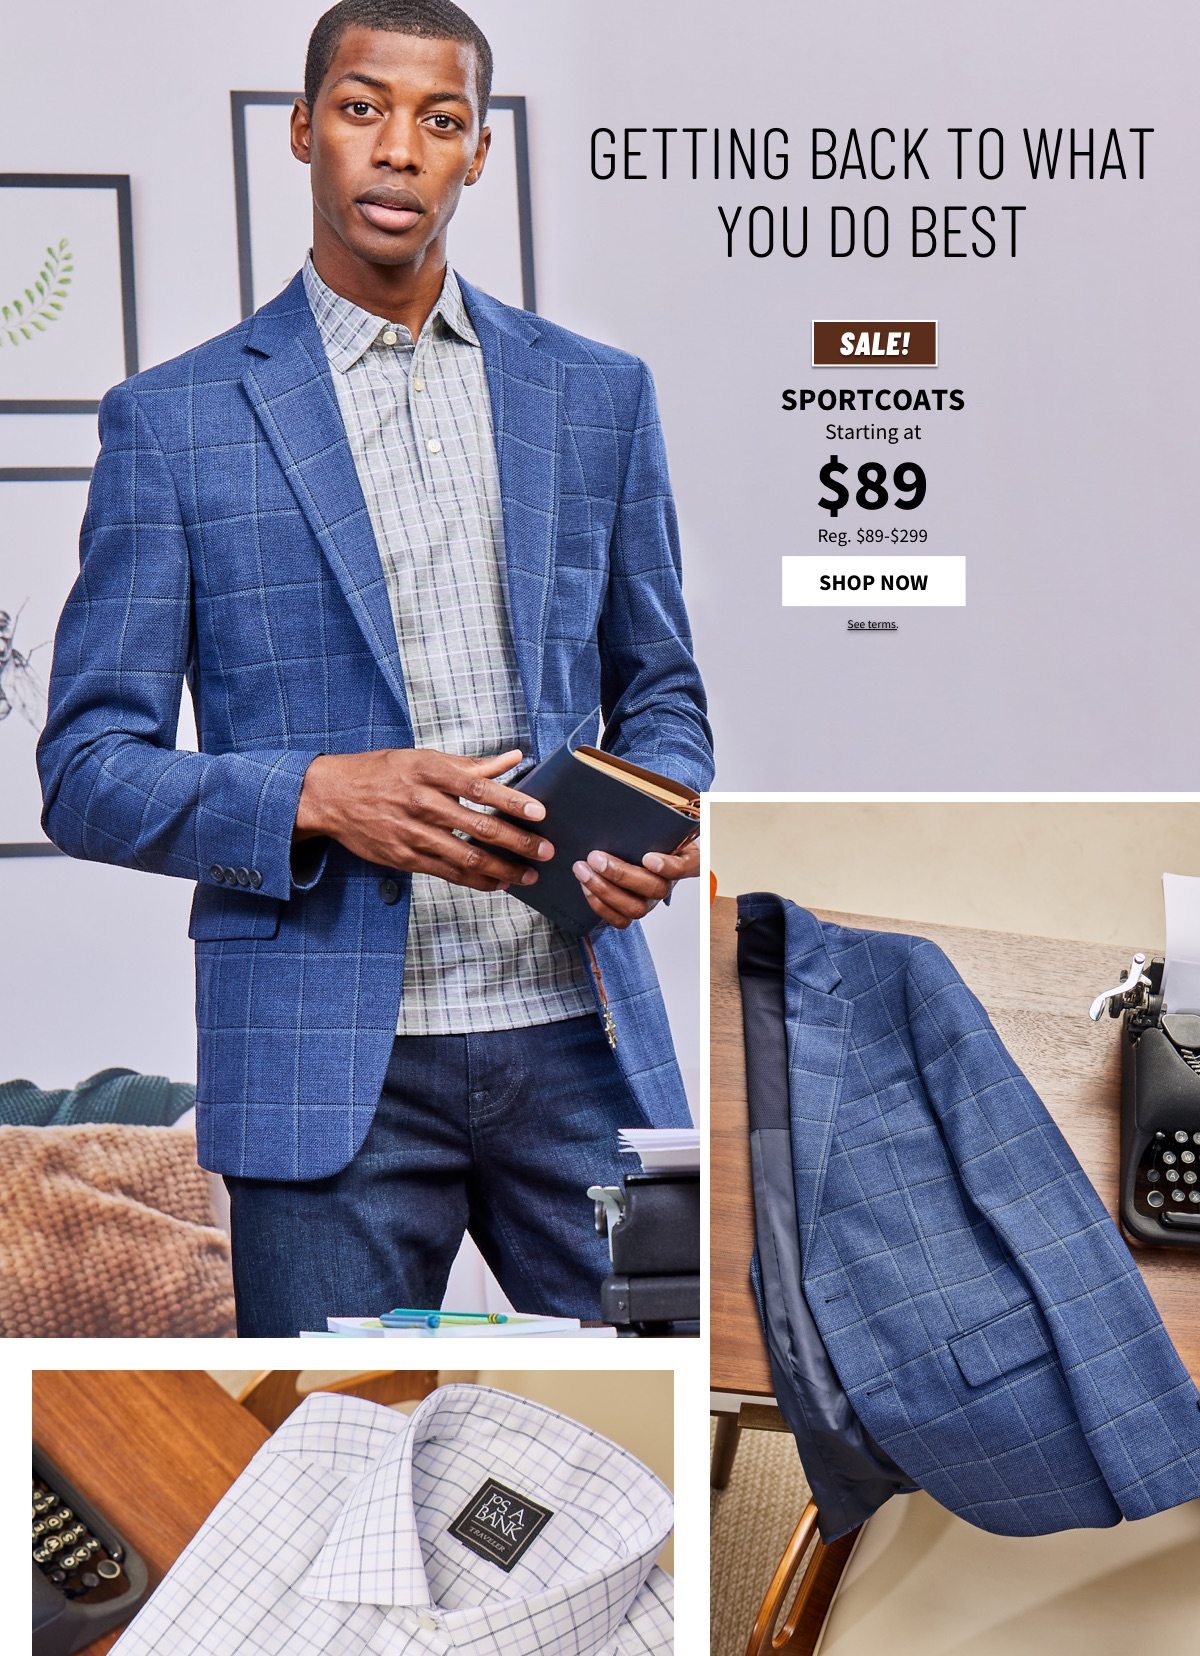 Sportcoats Starting at $89